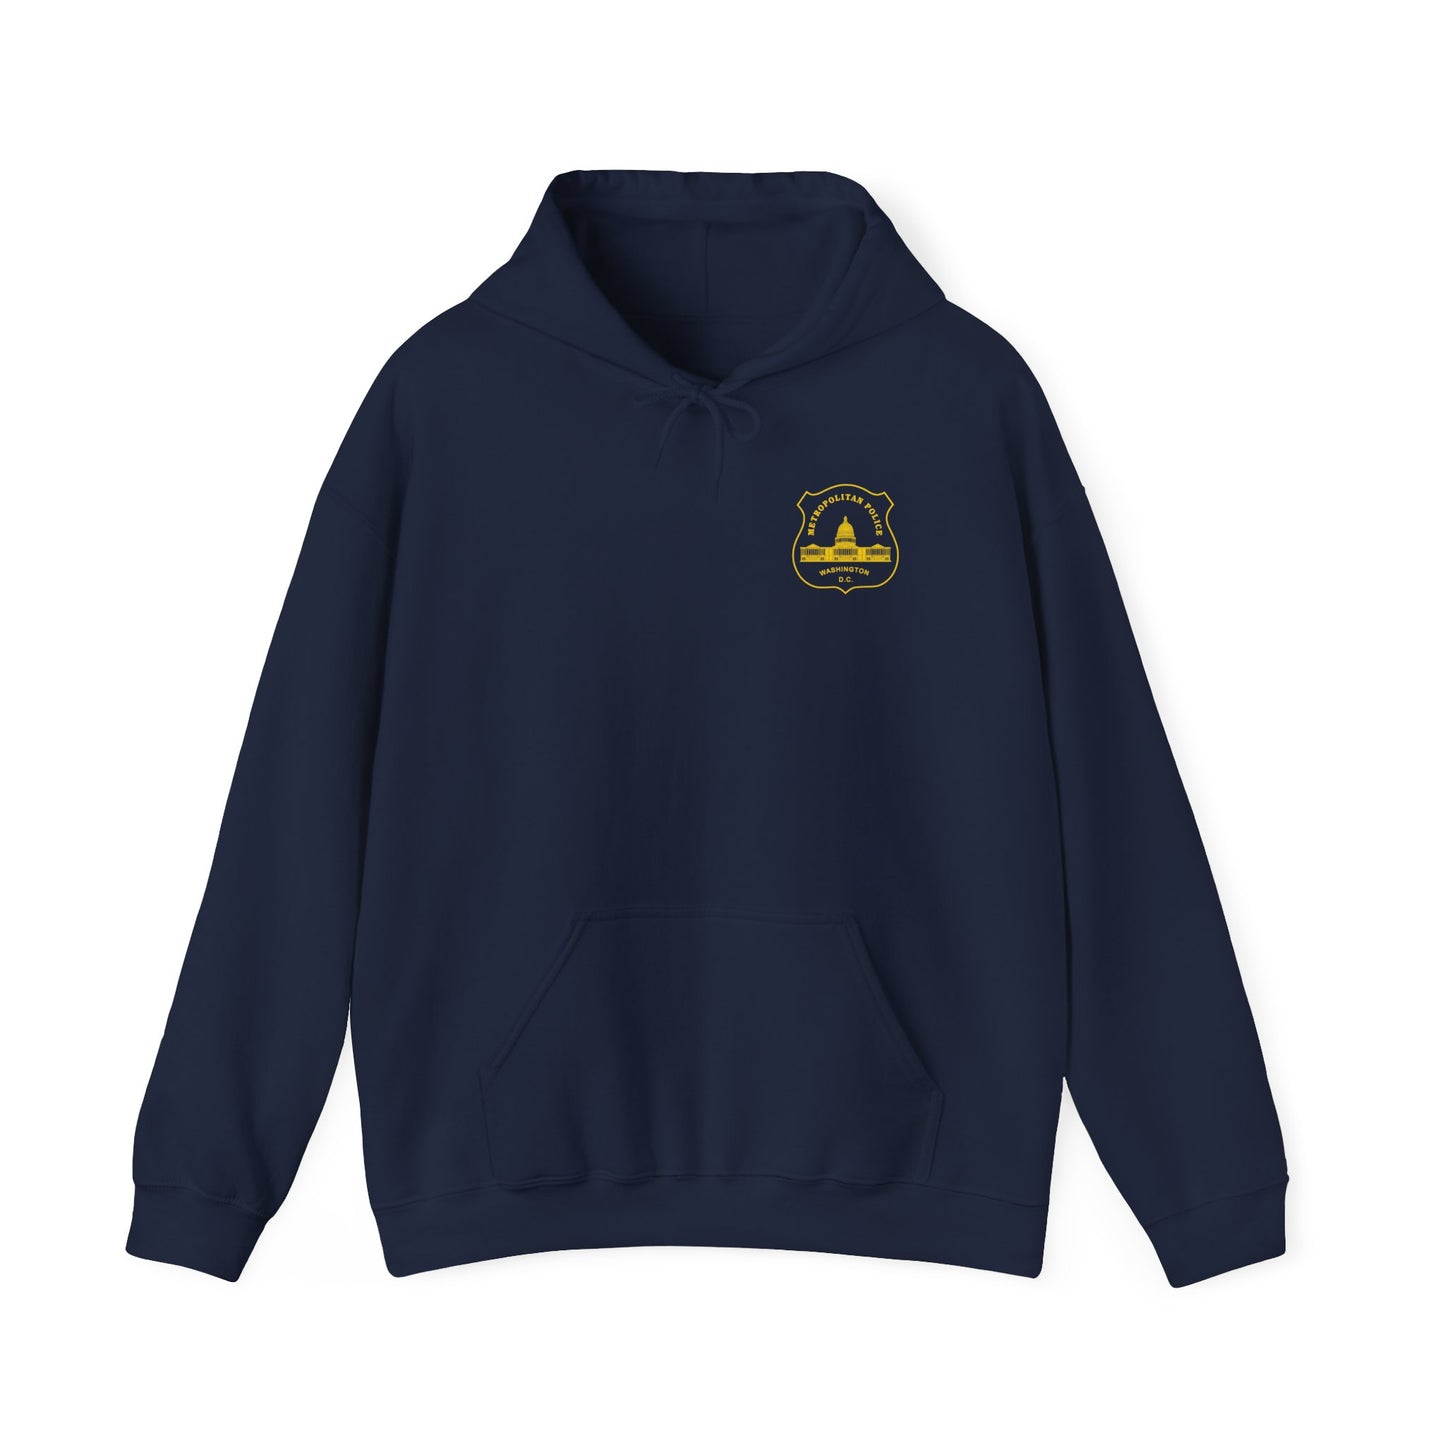 Classic MPD Fifth District Hooded Sweatshirt